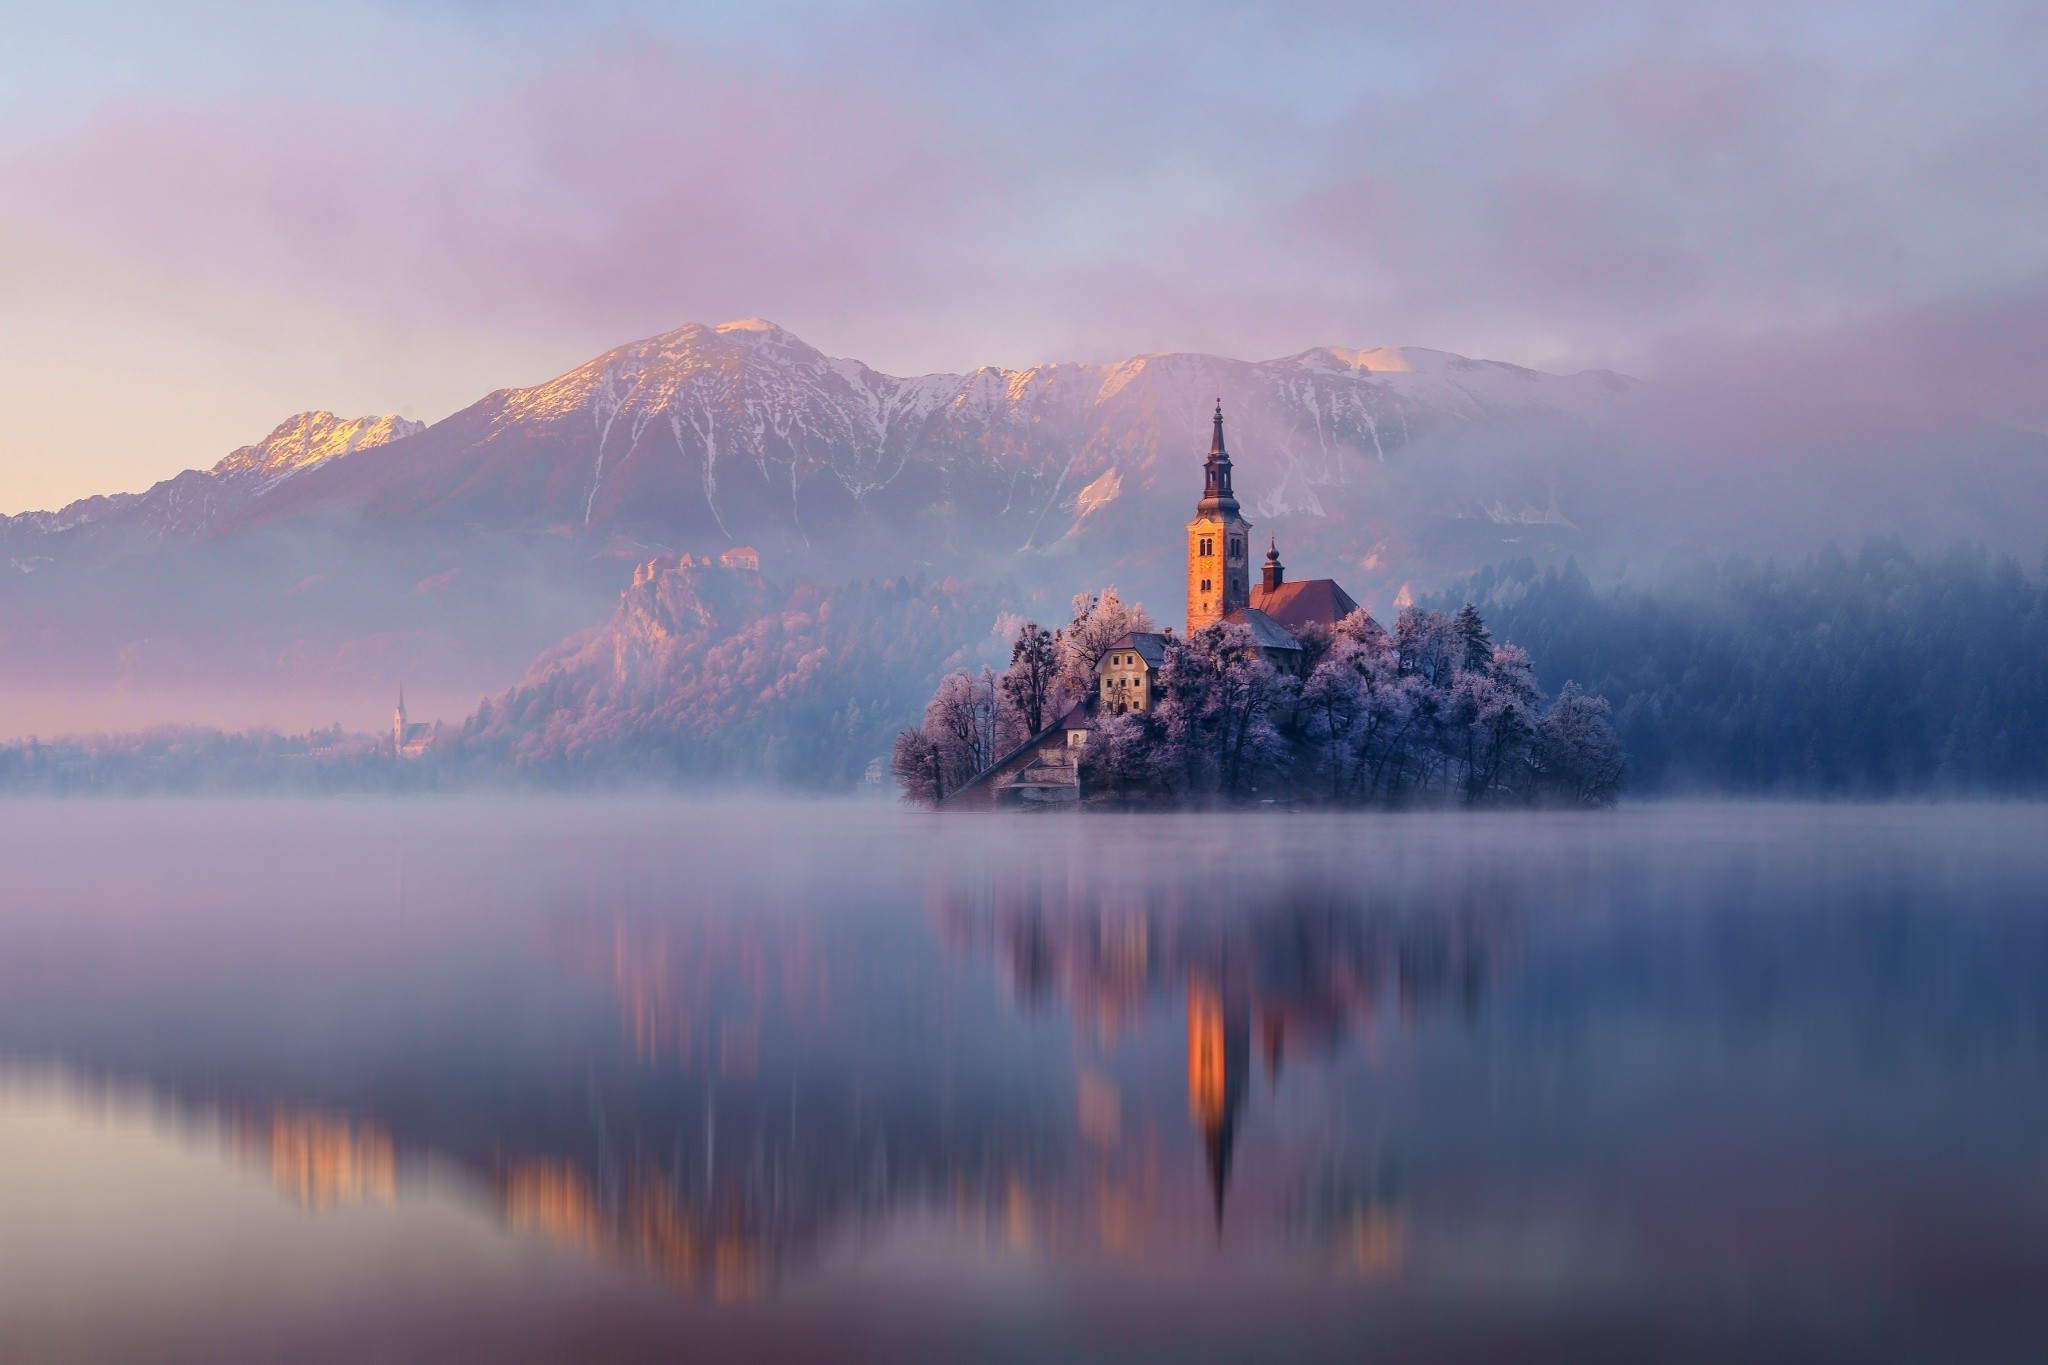 nature, Landscape, Architecture, Church, Trees, Mountain, Winter, Snow, Mist, Island, Lake, Water, Reflection, Sunset, Slovenia, Lake Bled, Morning Wallpaper